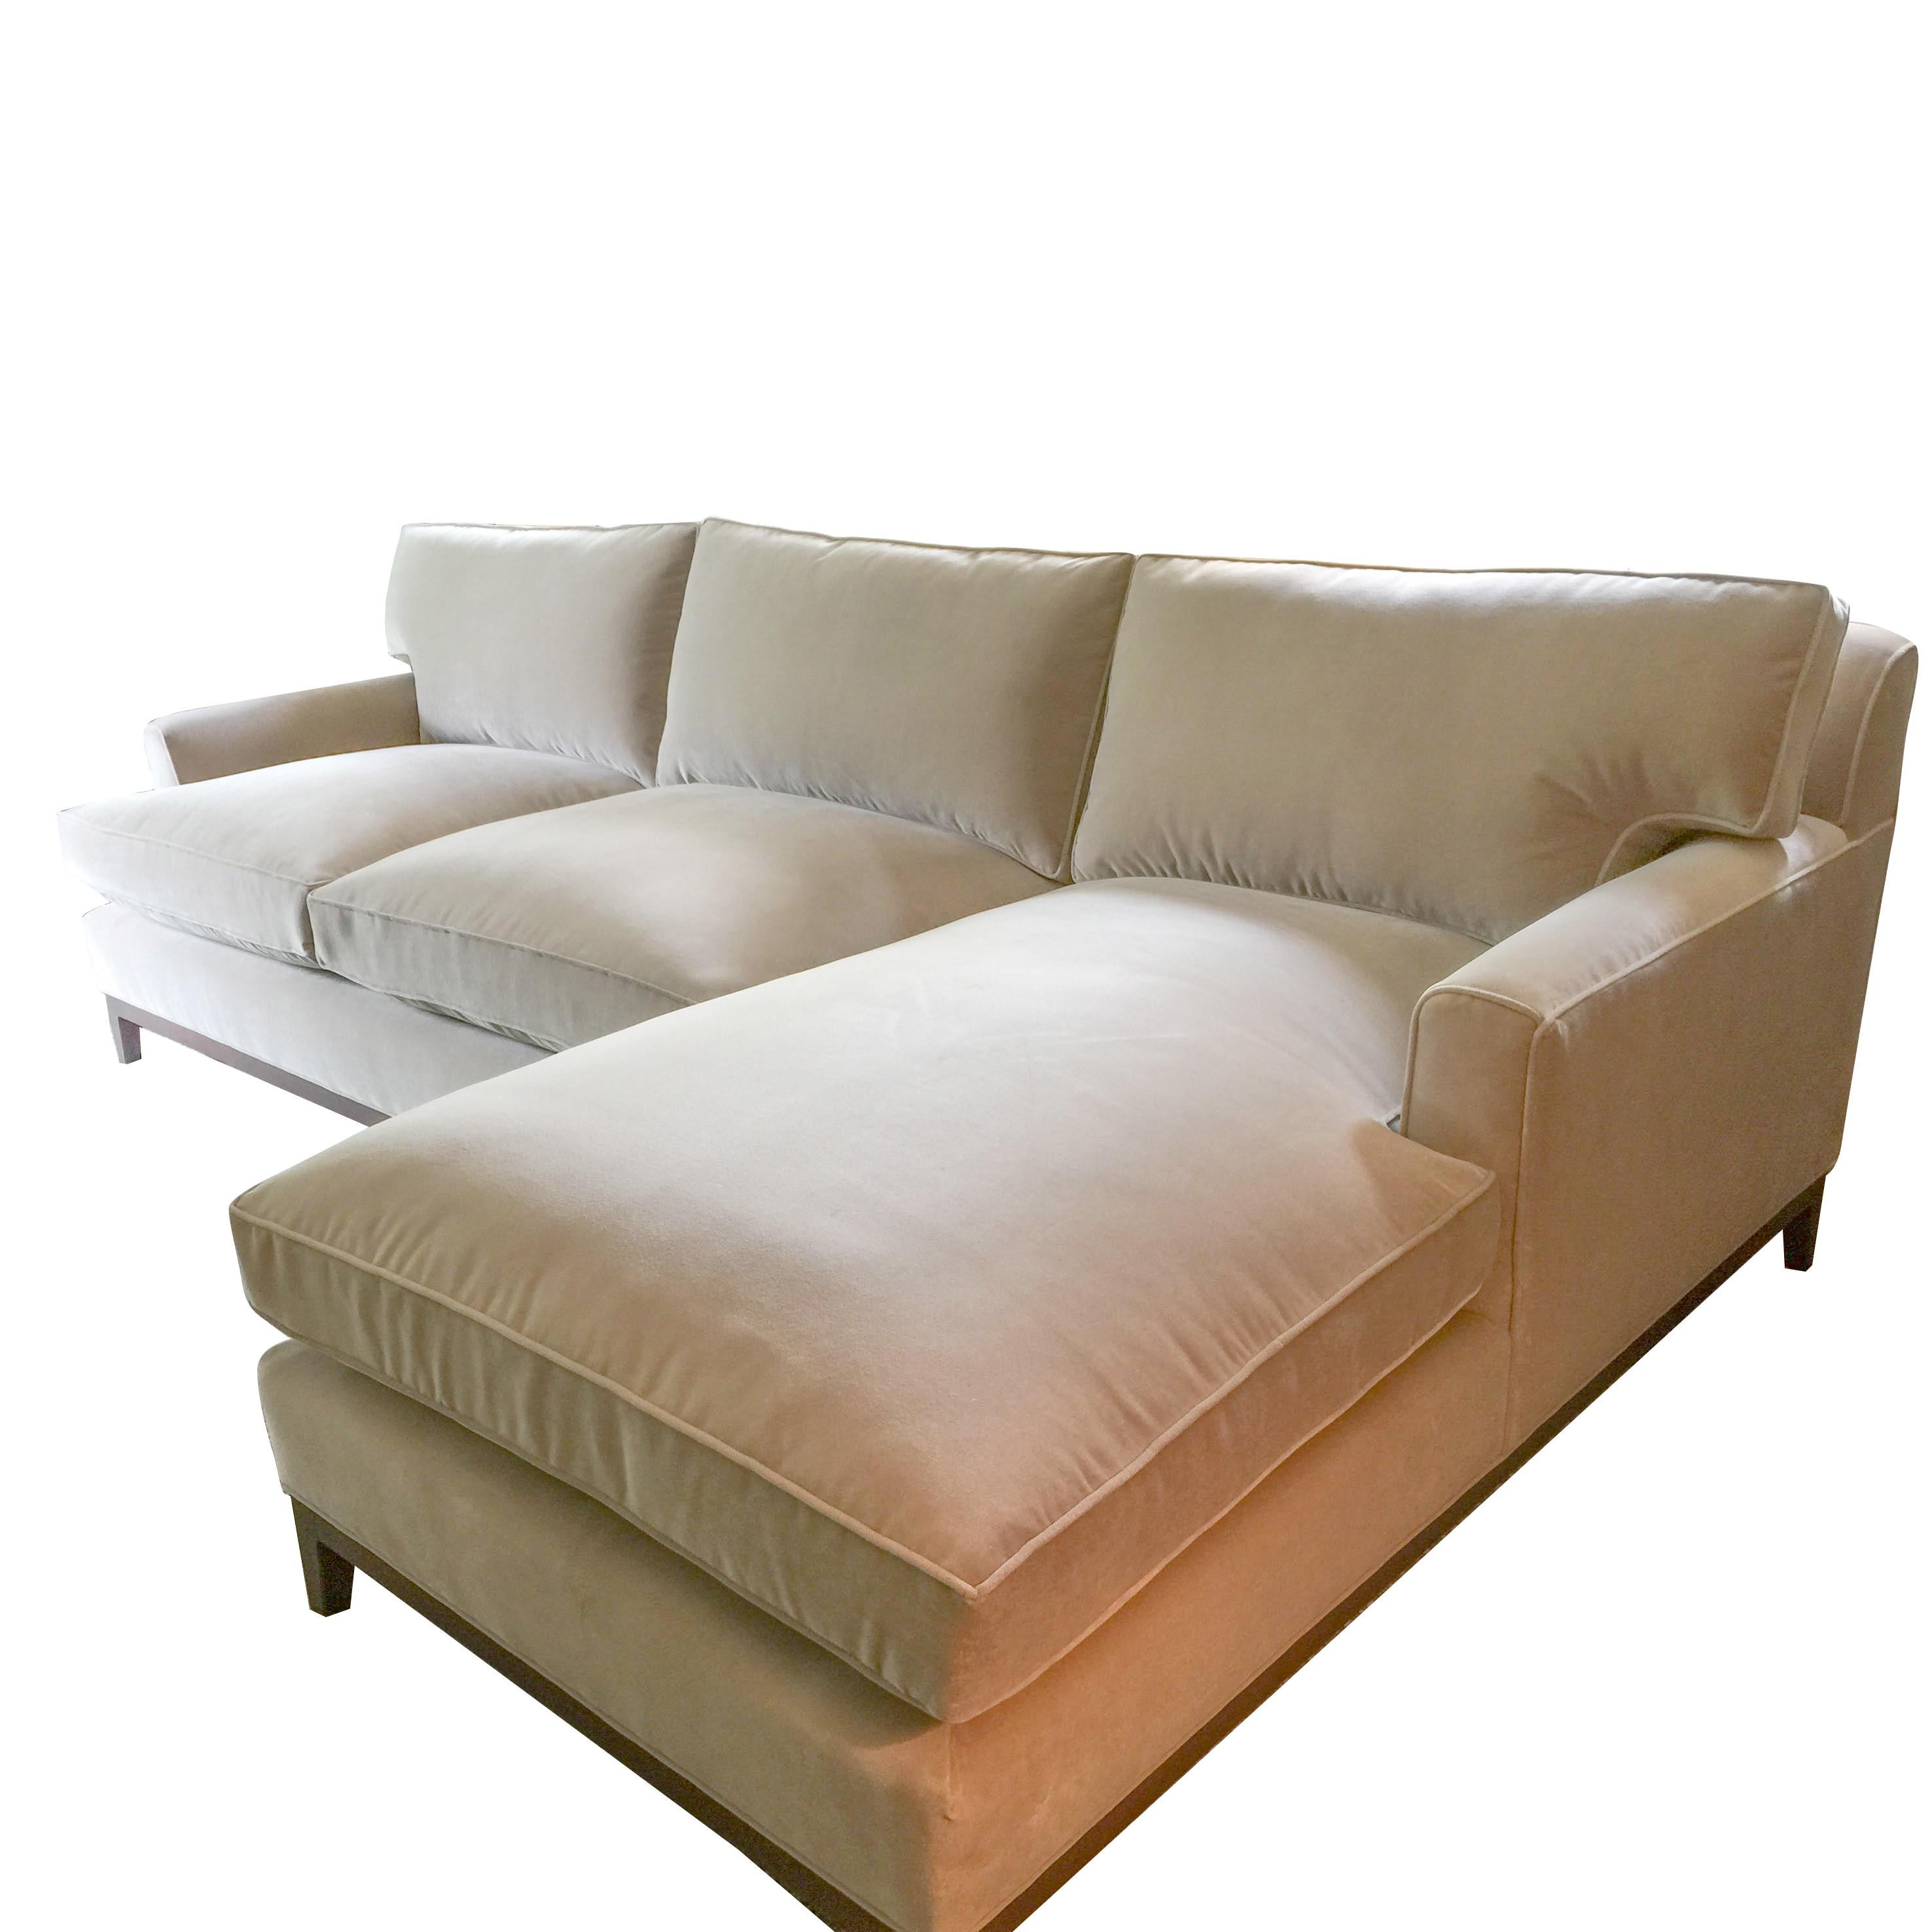 chaise lounge loveseat